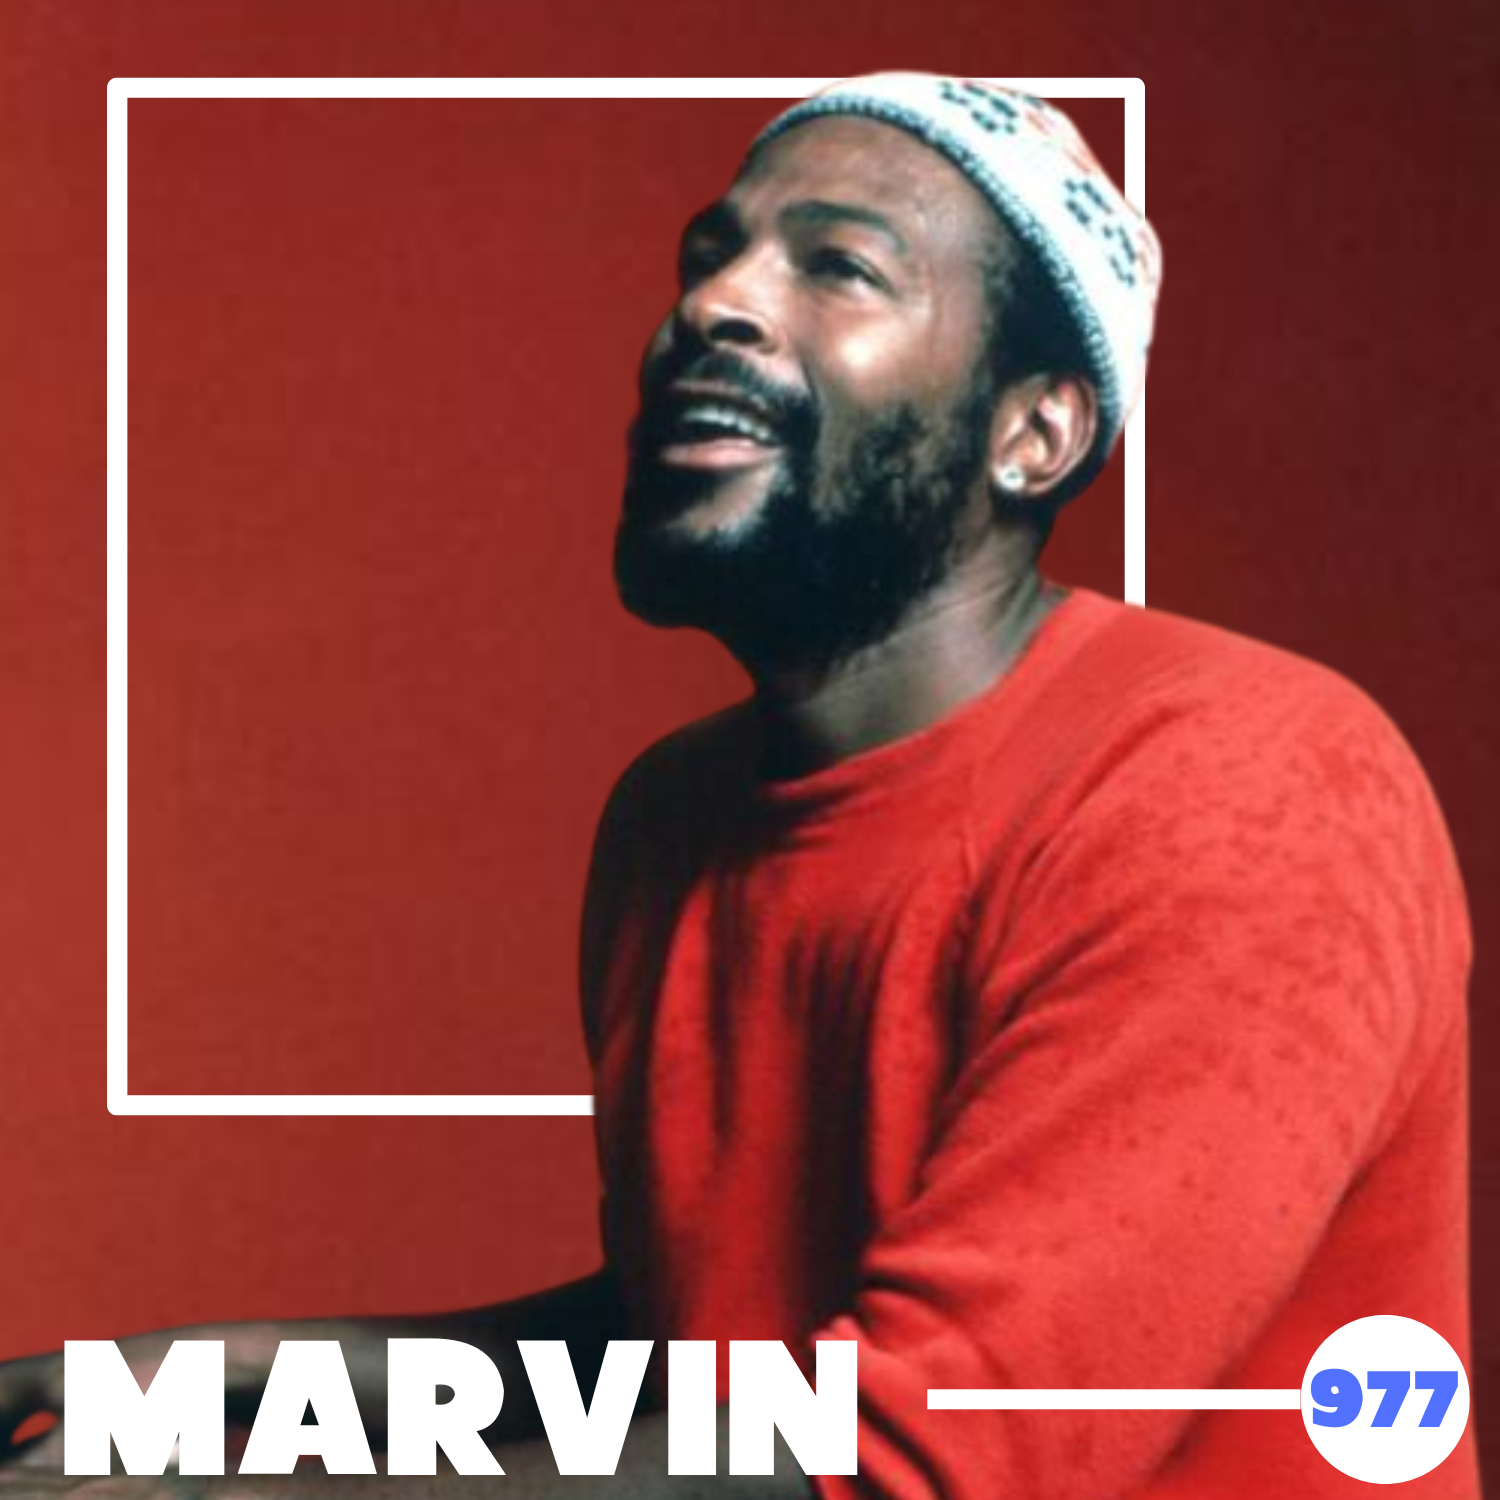 Marvin 977